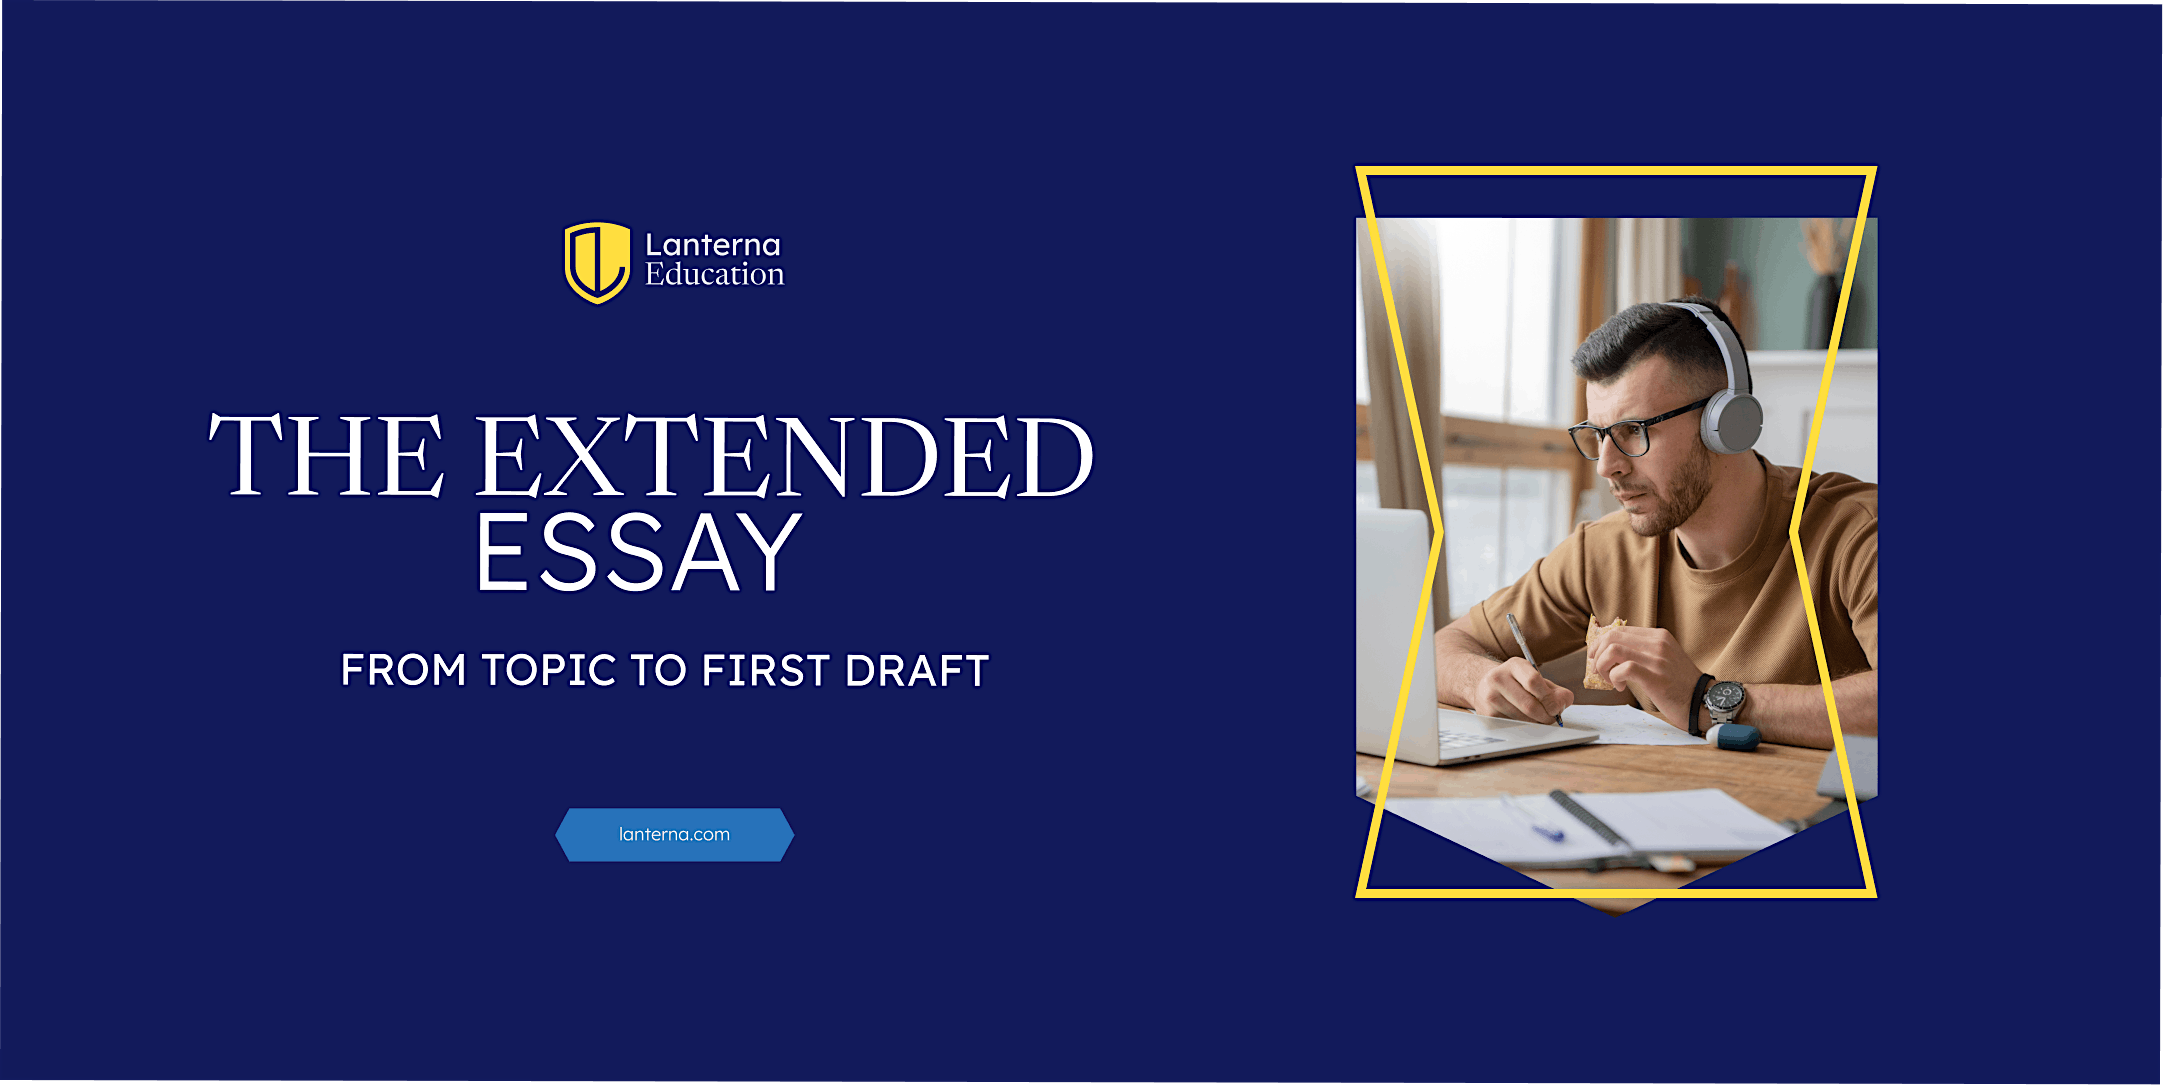 The Extended Essay: From Topic to First Draft